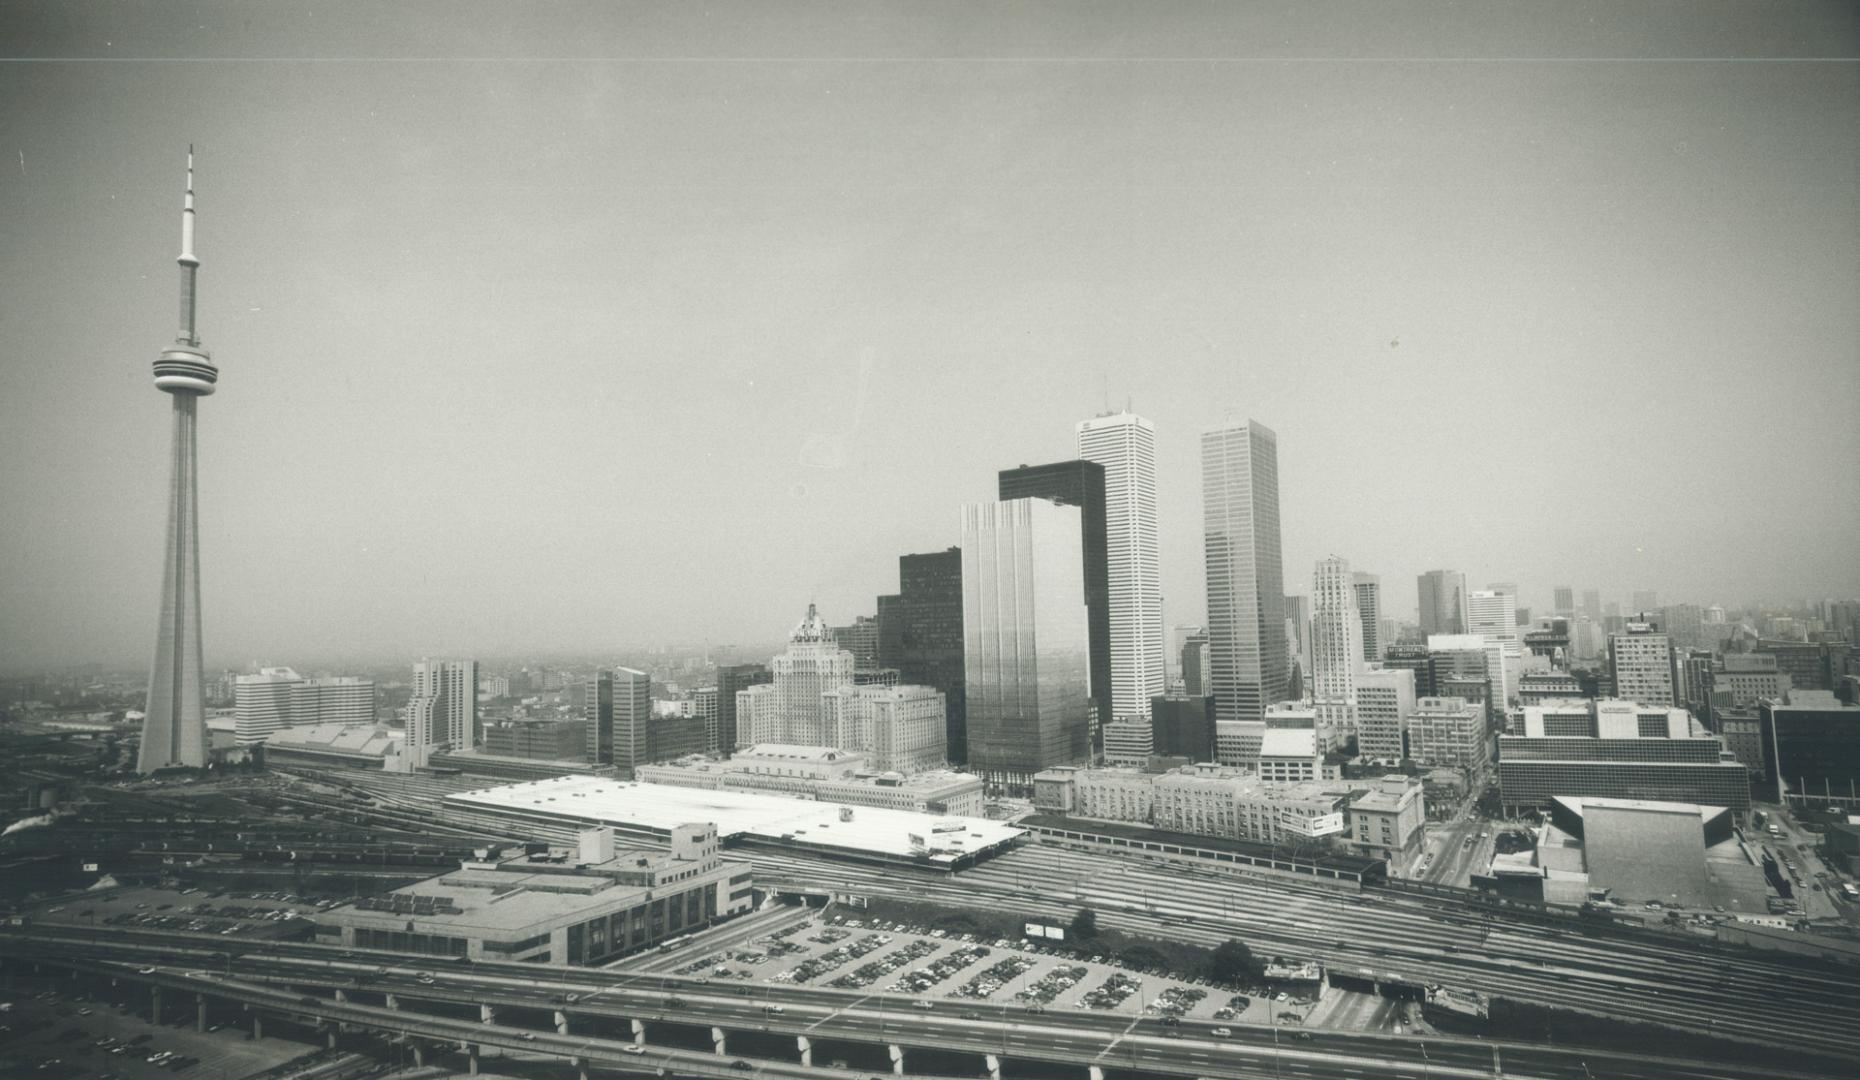 Image shows Harbour buildings and CN Tower on the left.